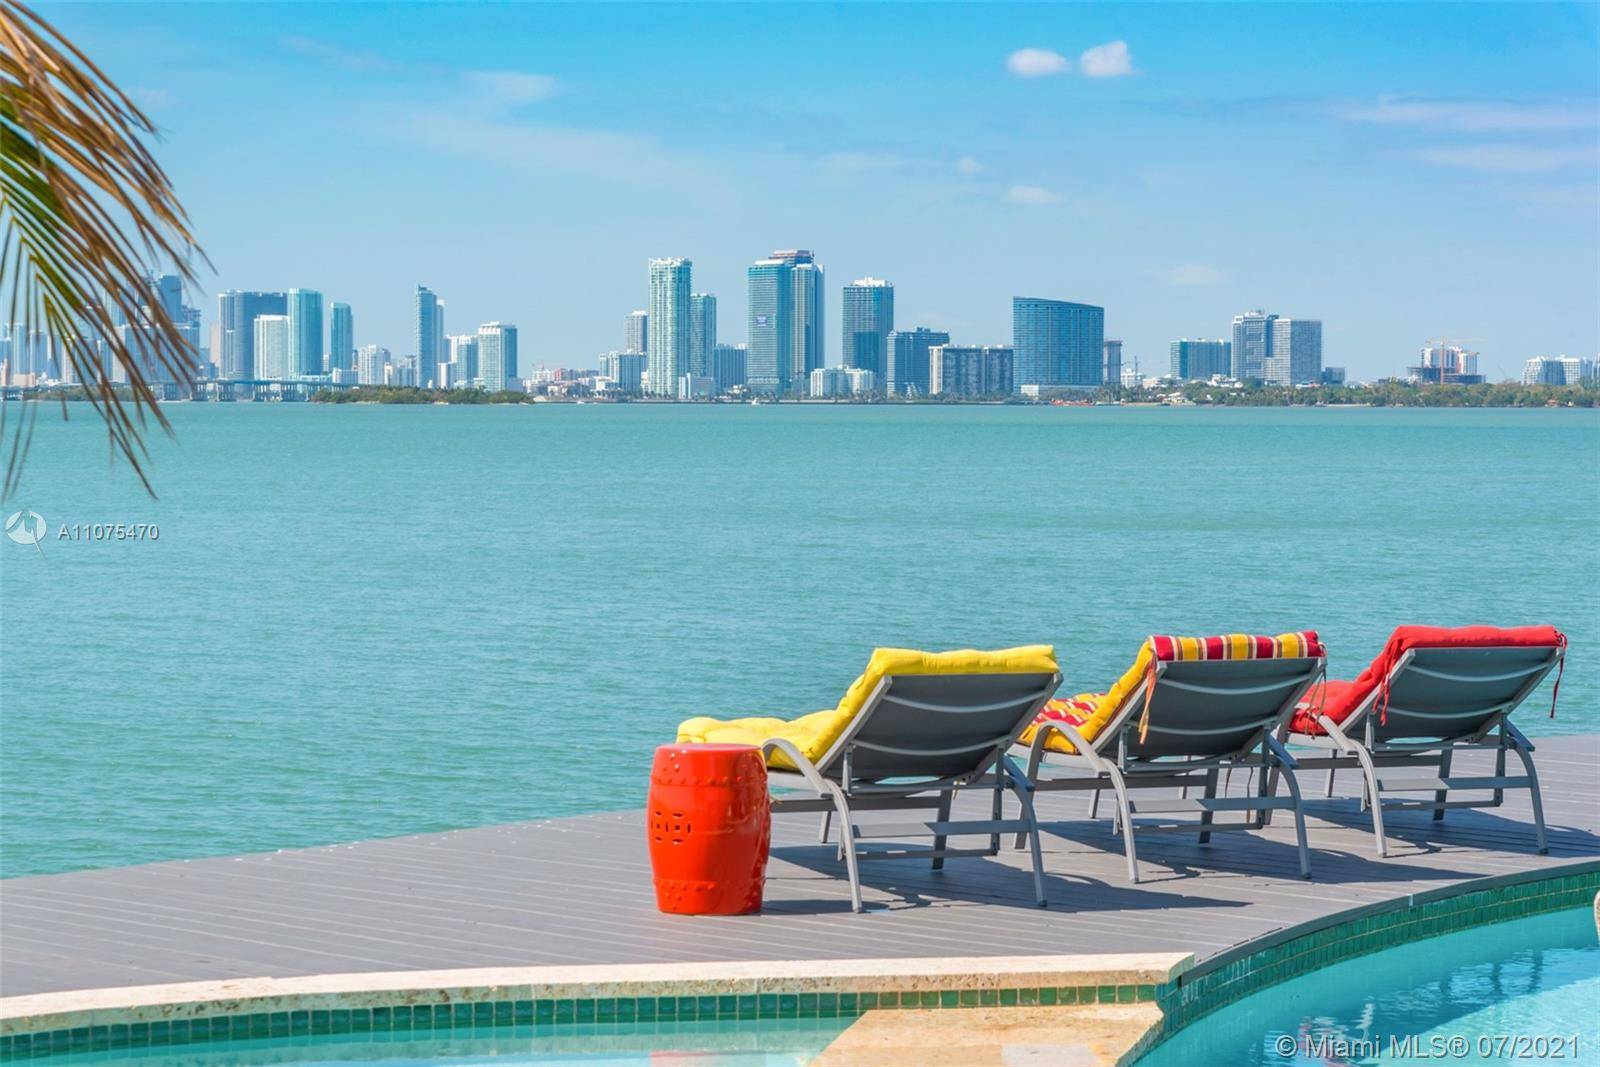 Best views in all miami consisting of downtown miami and sunrise and sunset.